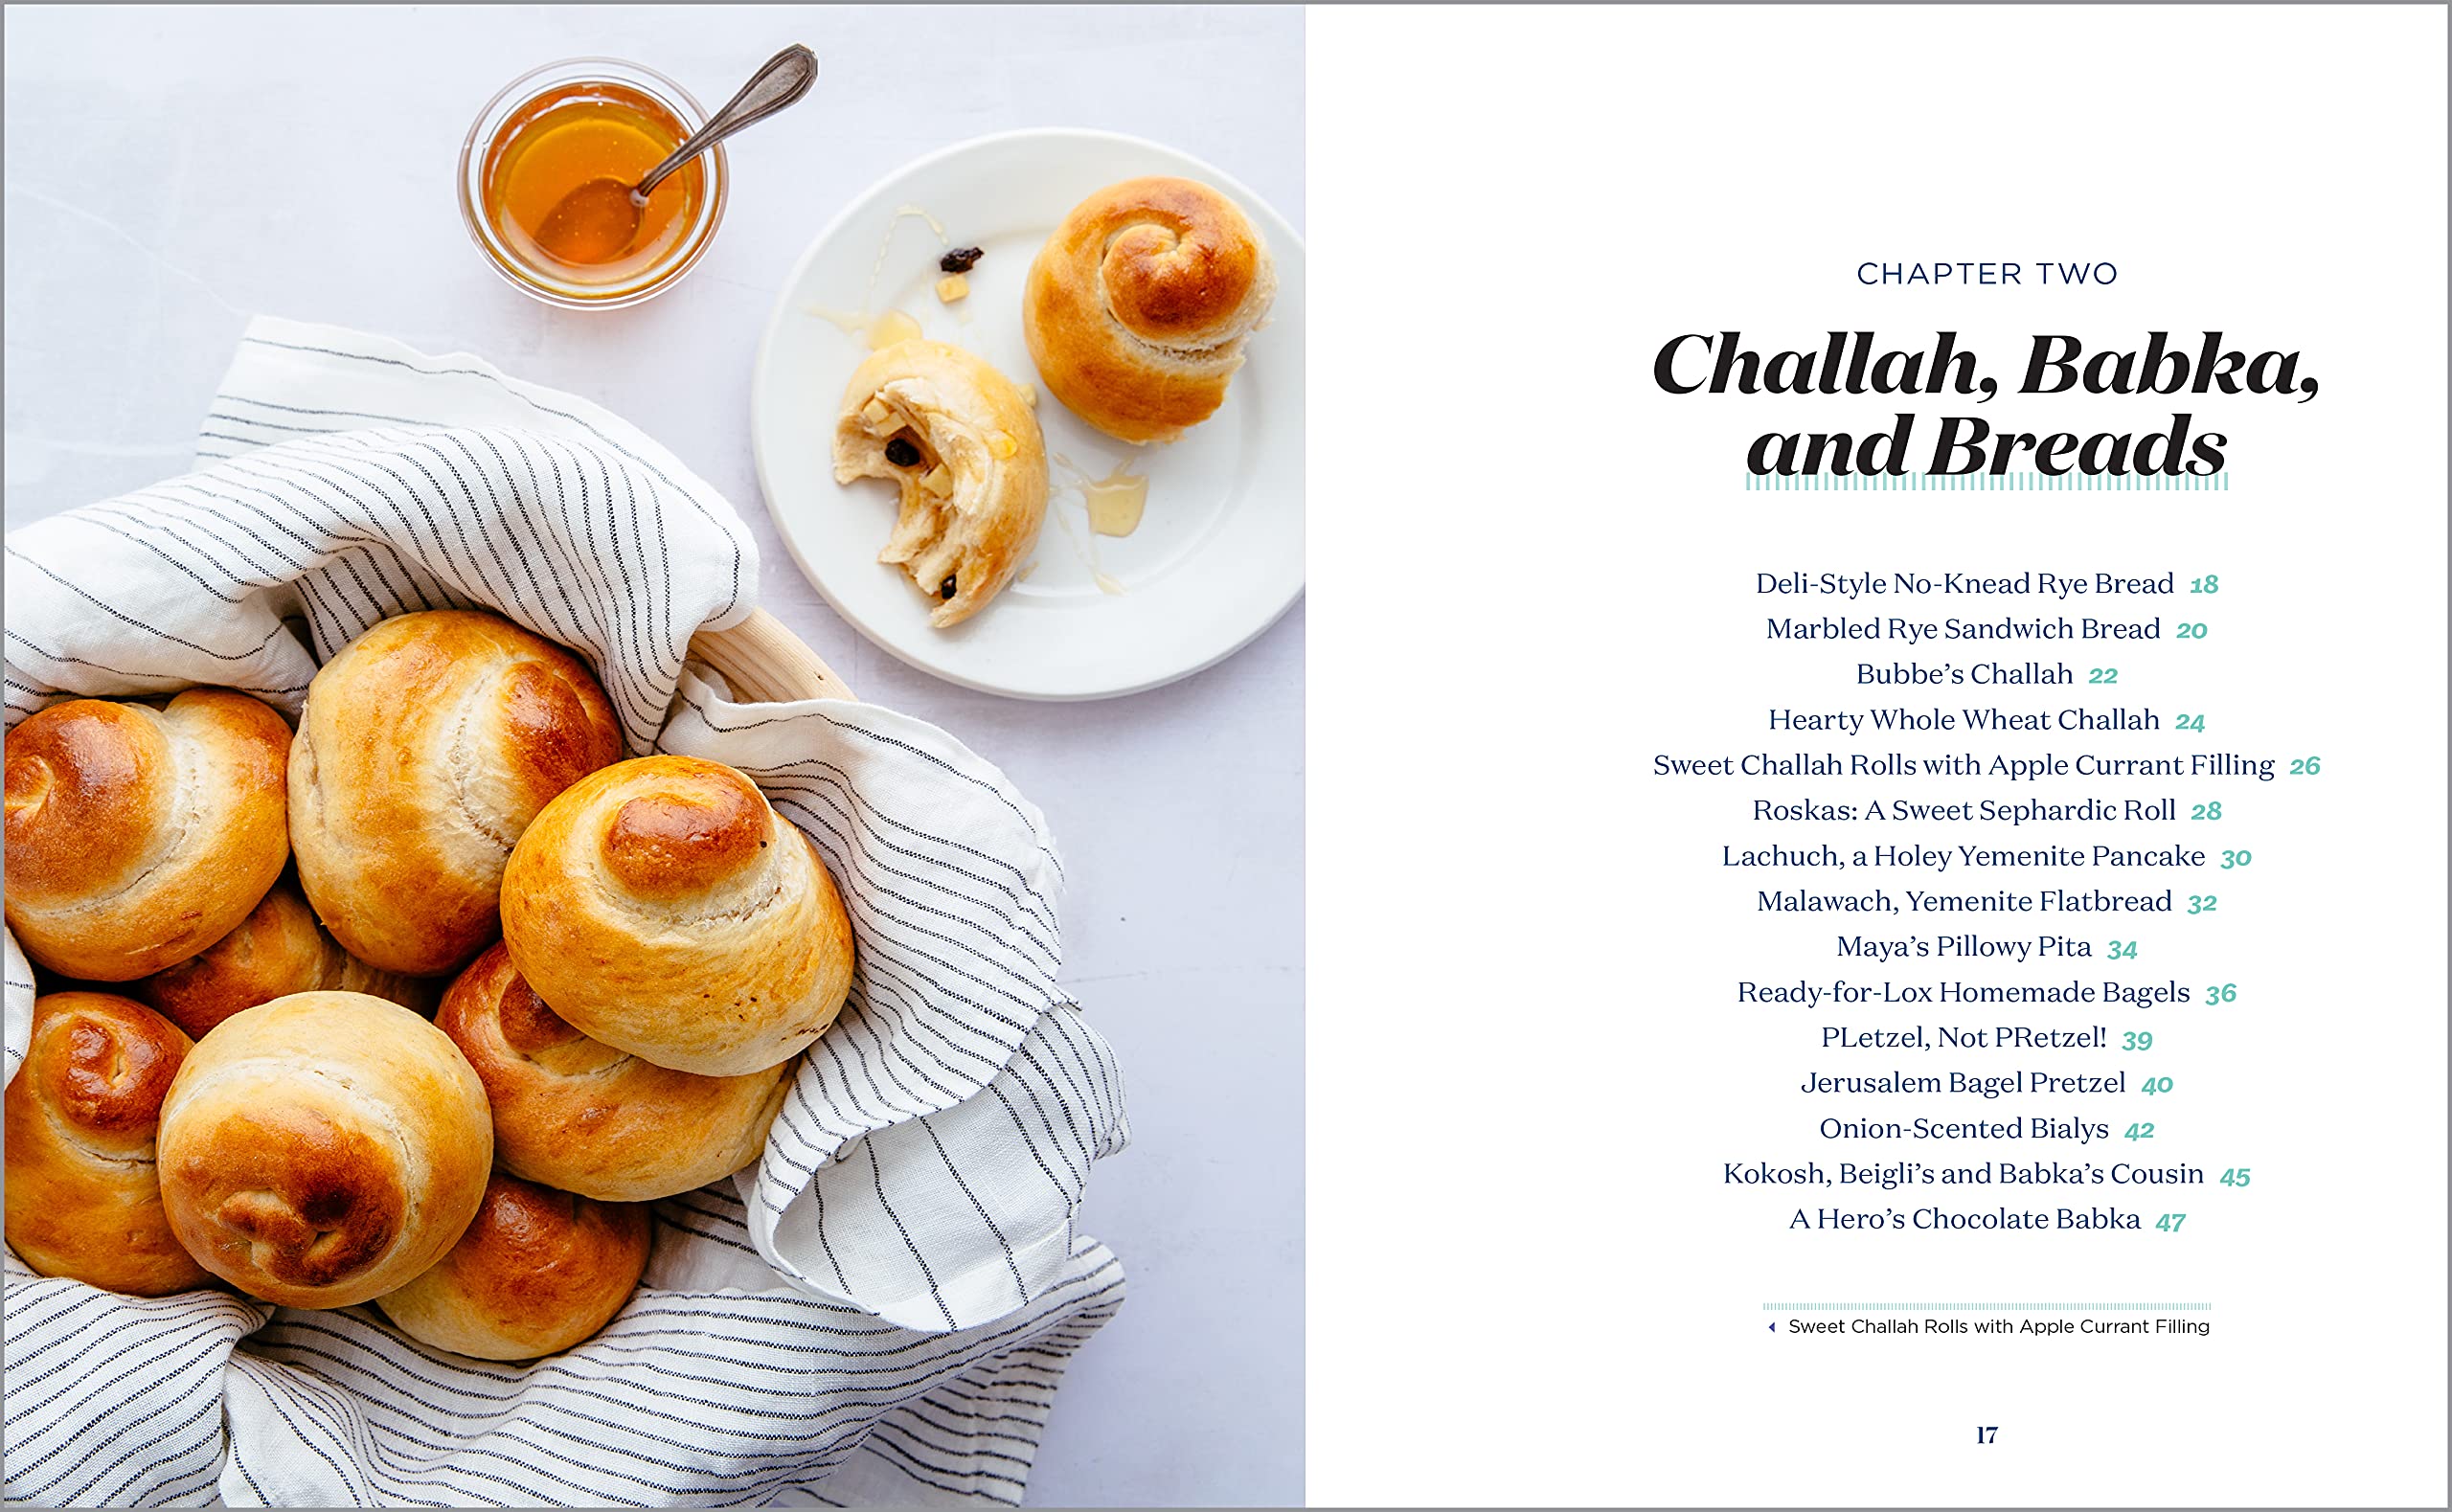 The Essential Jewish Baking Cookbook: 50 Traditional Recipes for Every Occasion (Beth A. Lee)